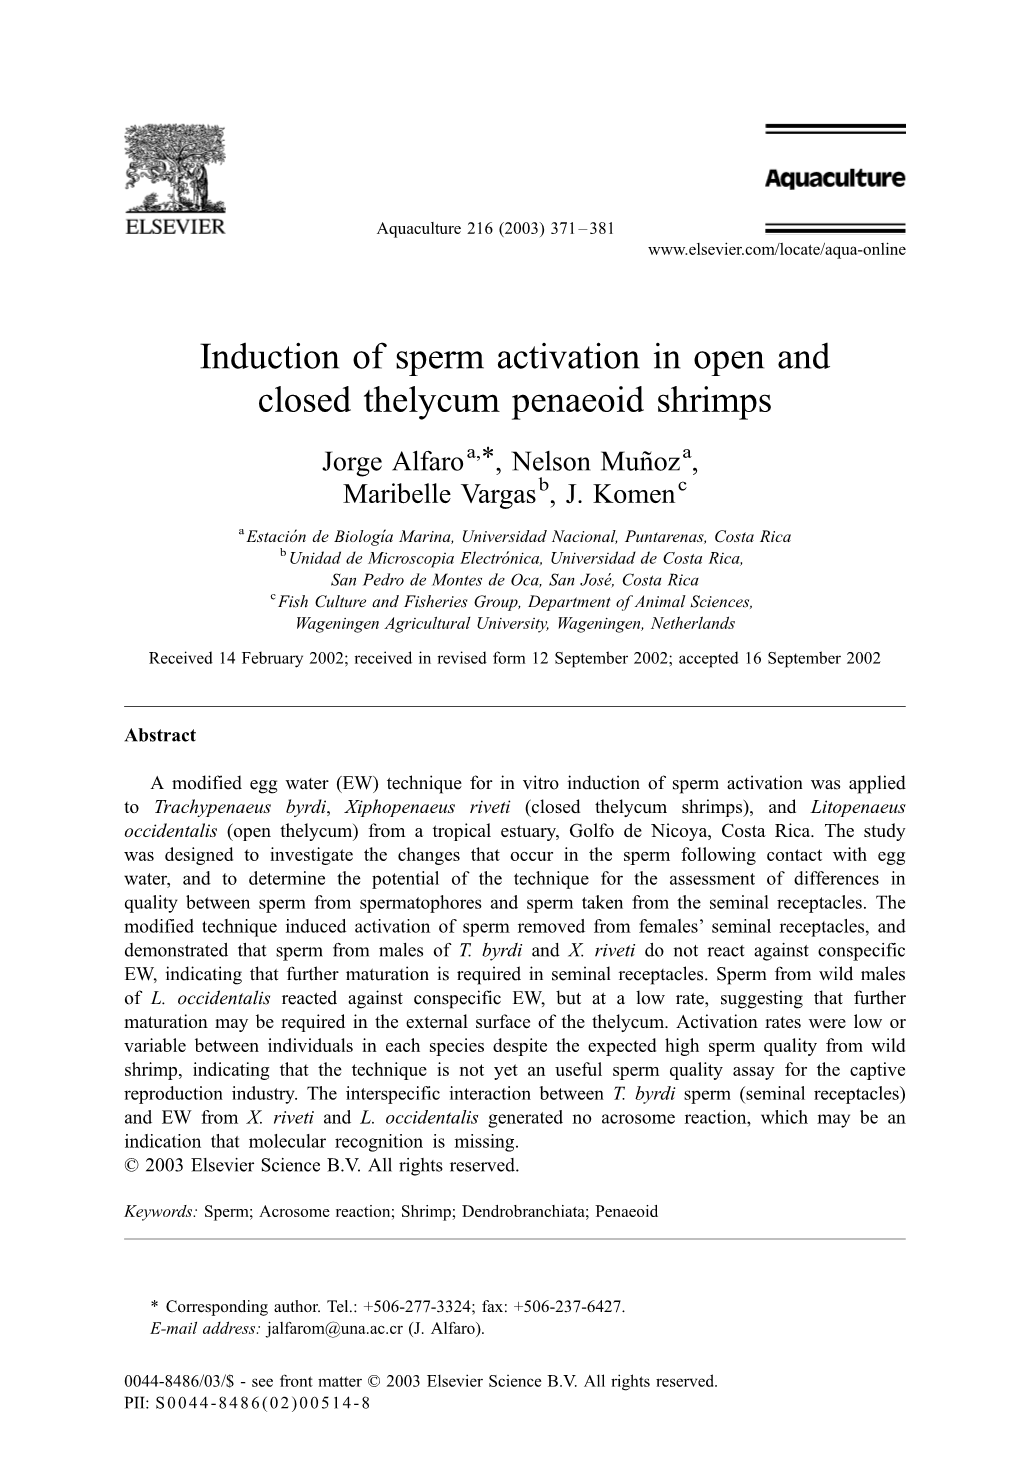 Induction of Sperm Activation in Open and Closed Thelycum Penaeoid Shrimps